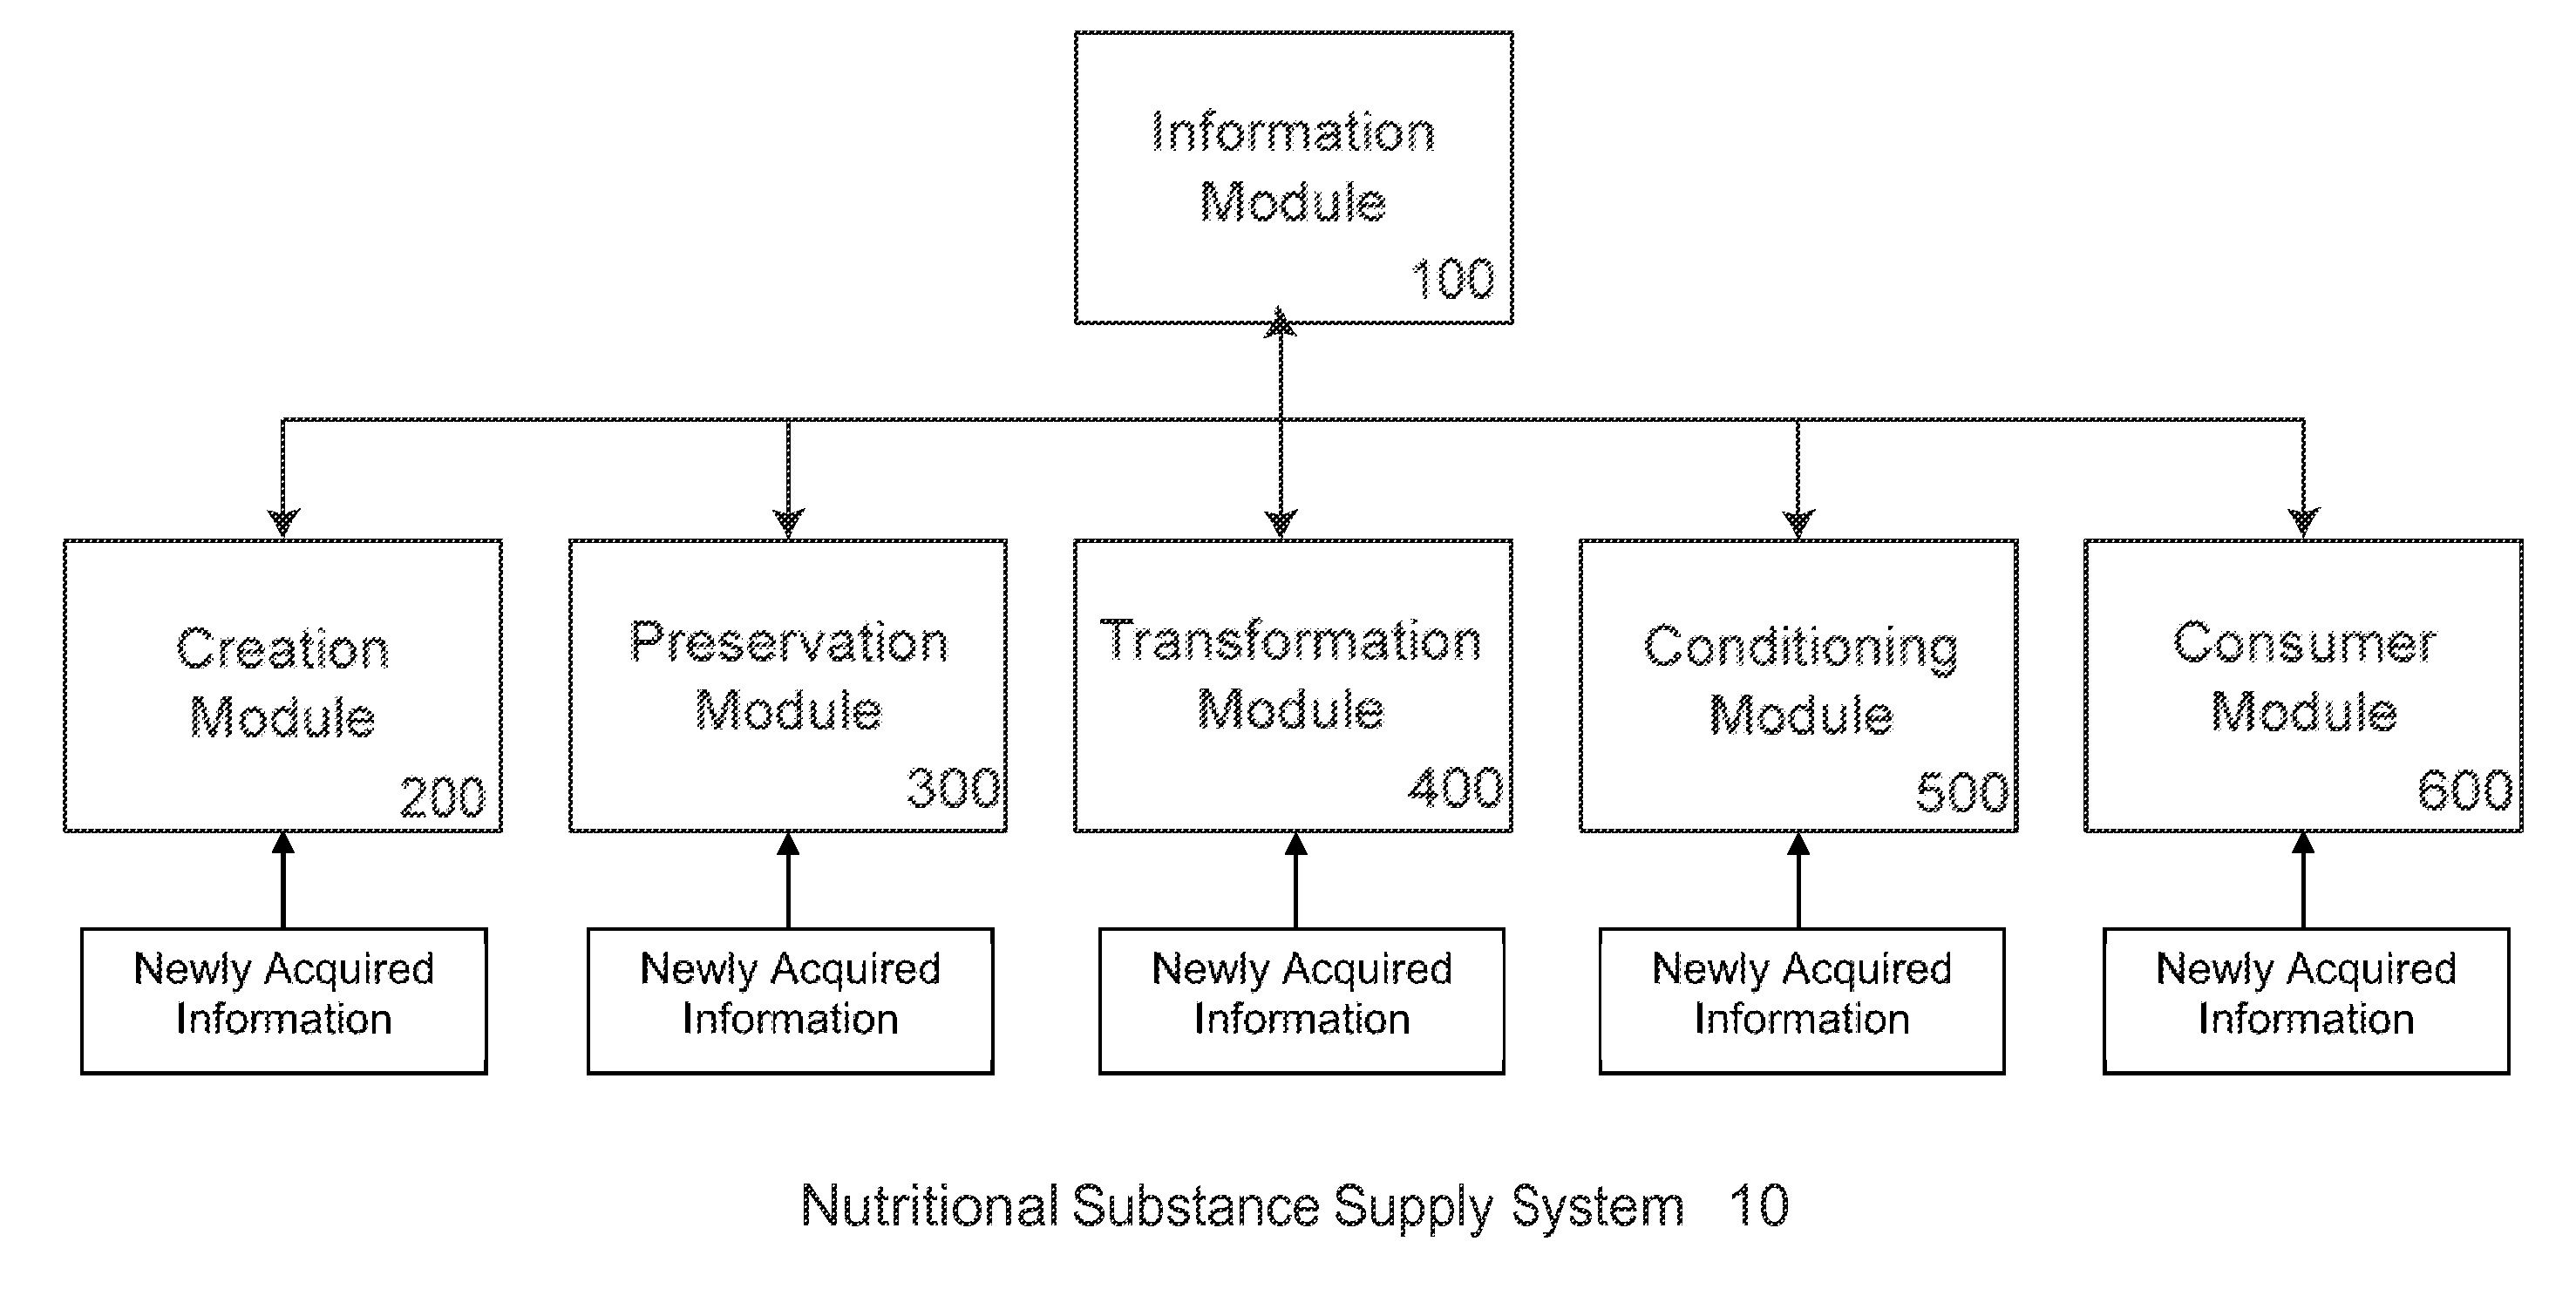 Appliances with weight sensors for nutritional substances